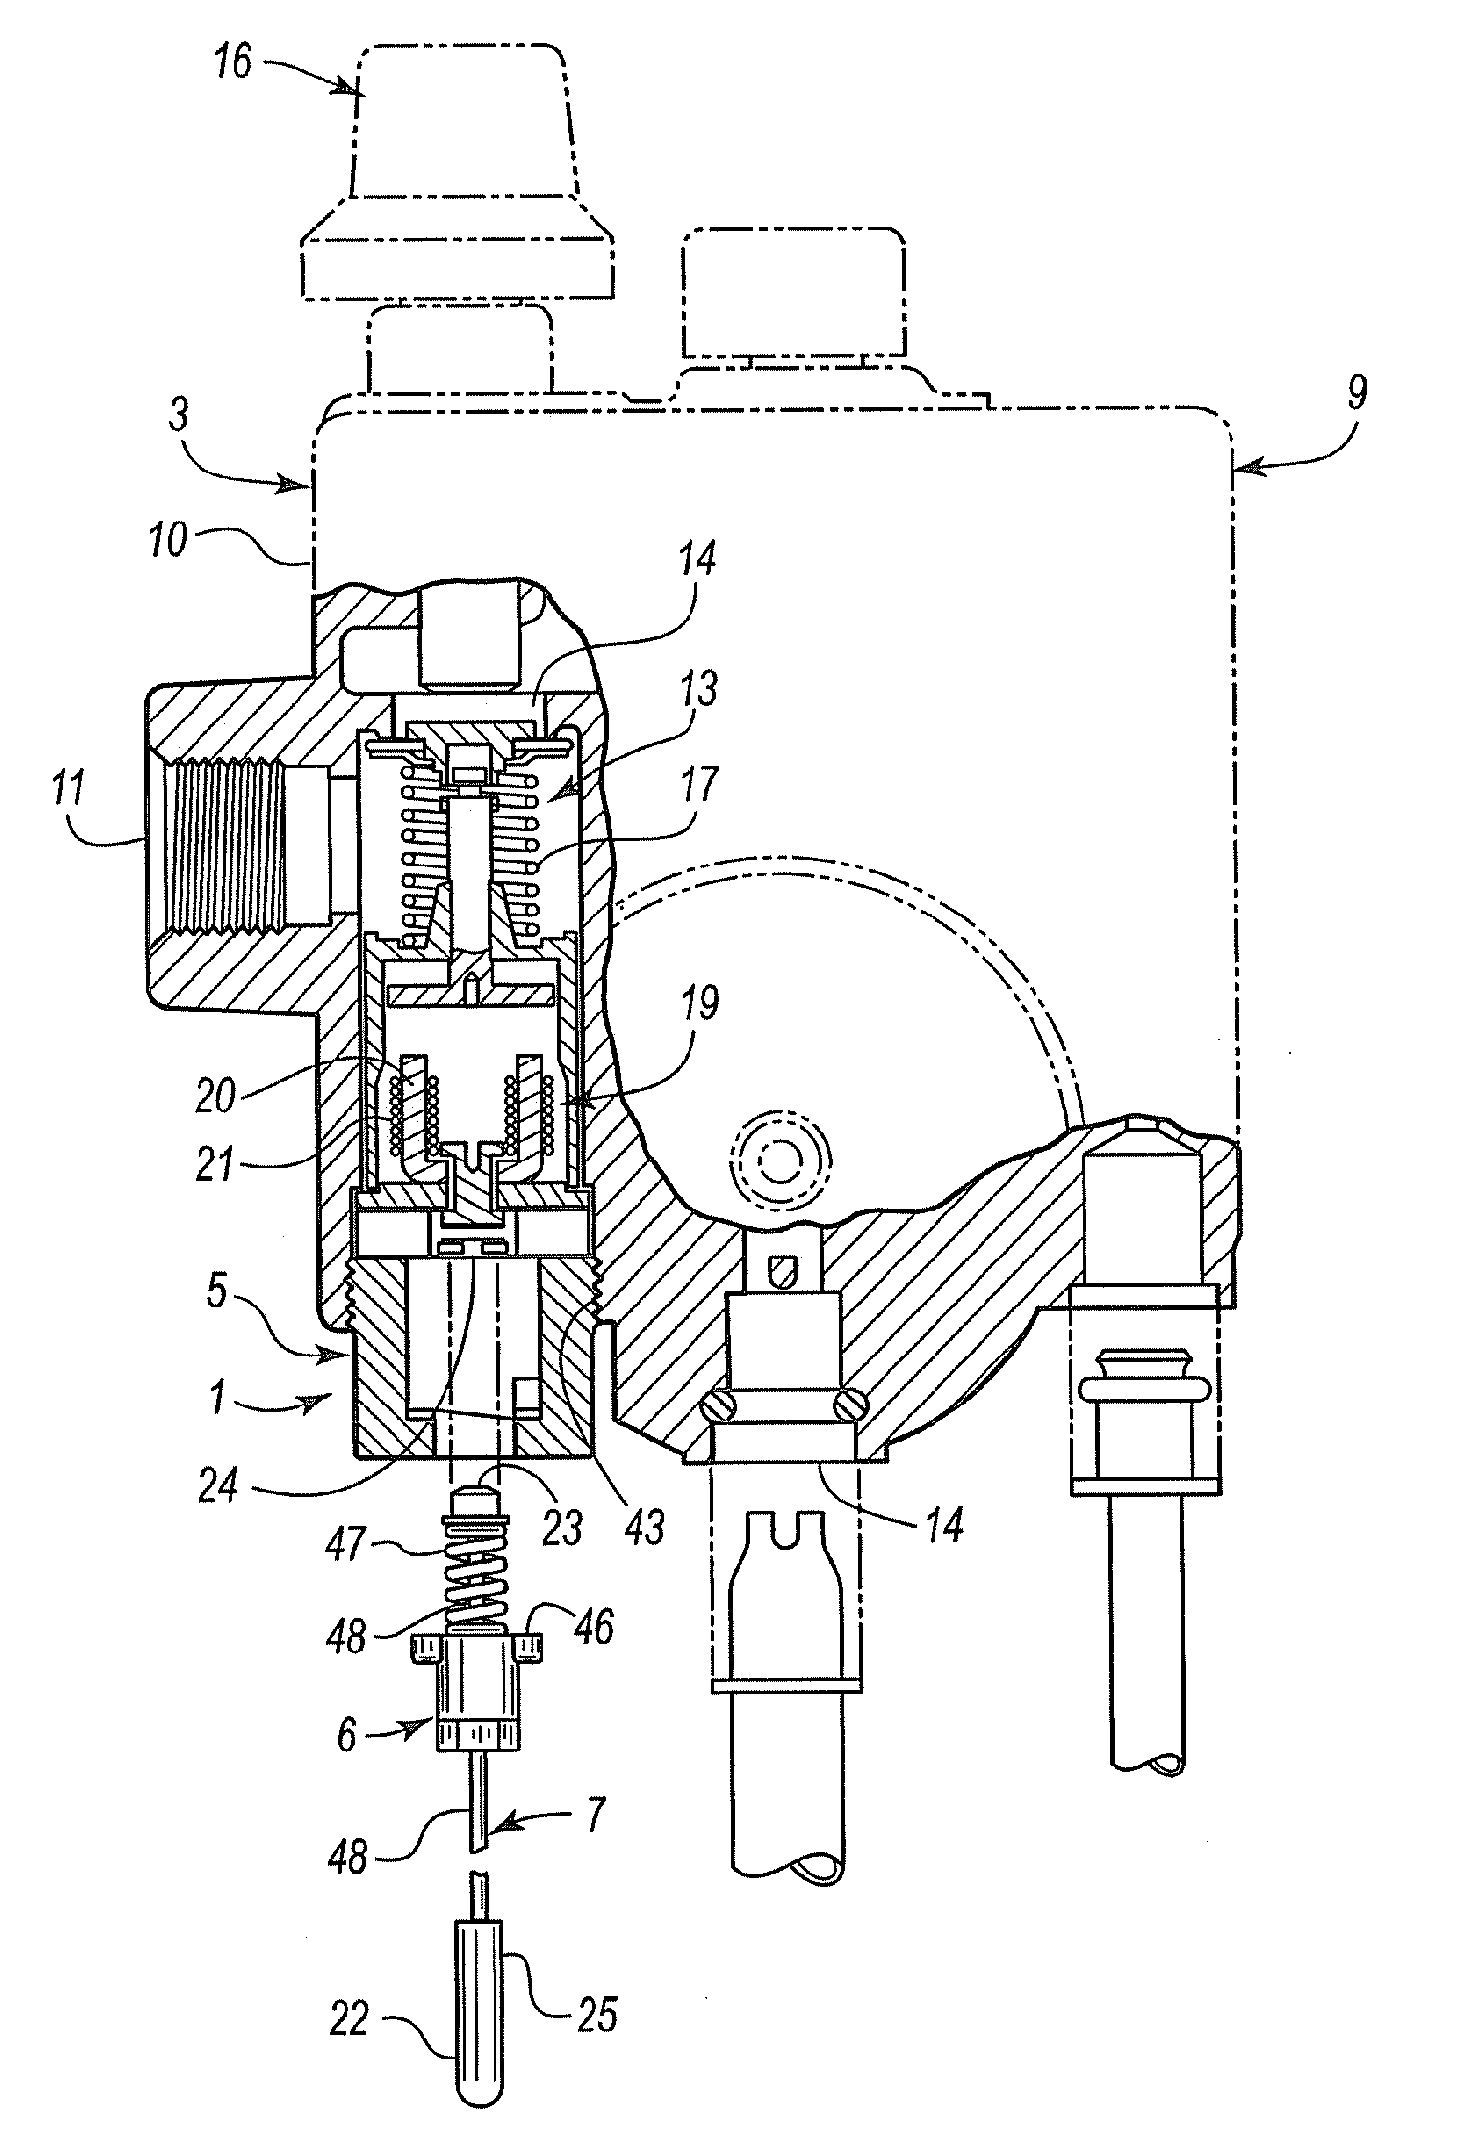 Quick connect thermocouple mounting device and associated method of use